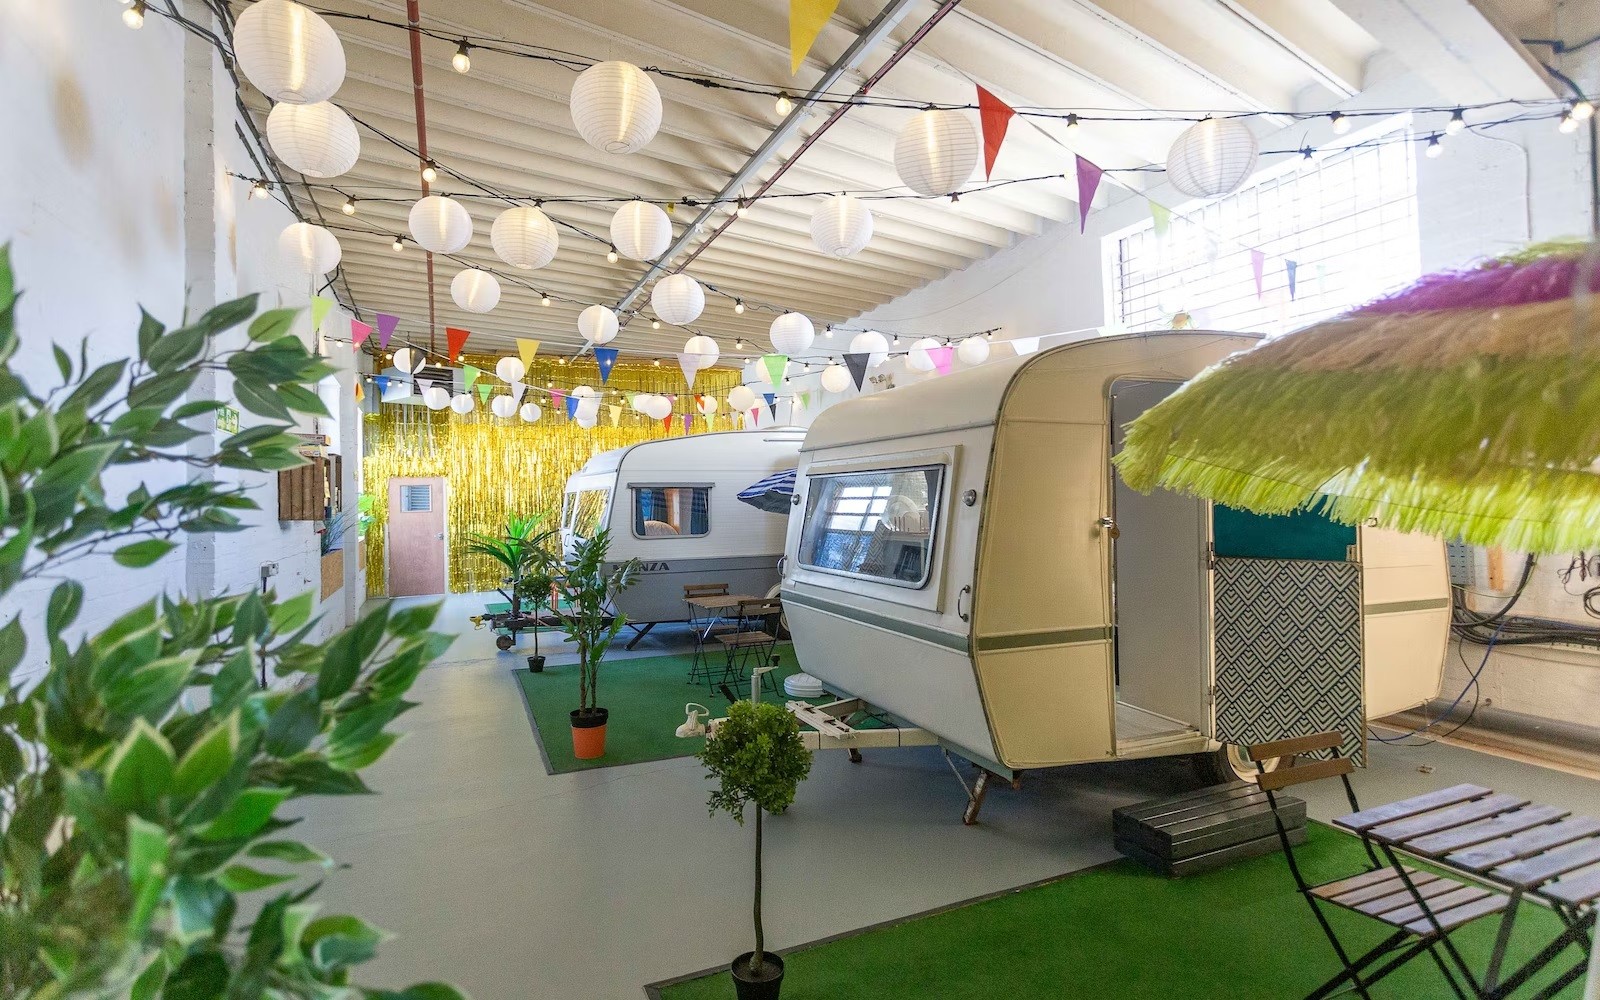 https://s1.cdn.autoevolution.com/images/news/gallery/towed-town-camping-is-an-indoor-campground-offering-accommodation-in-five-vintage-caravans_5.jpg